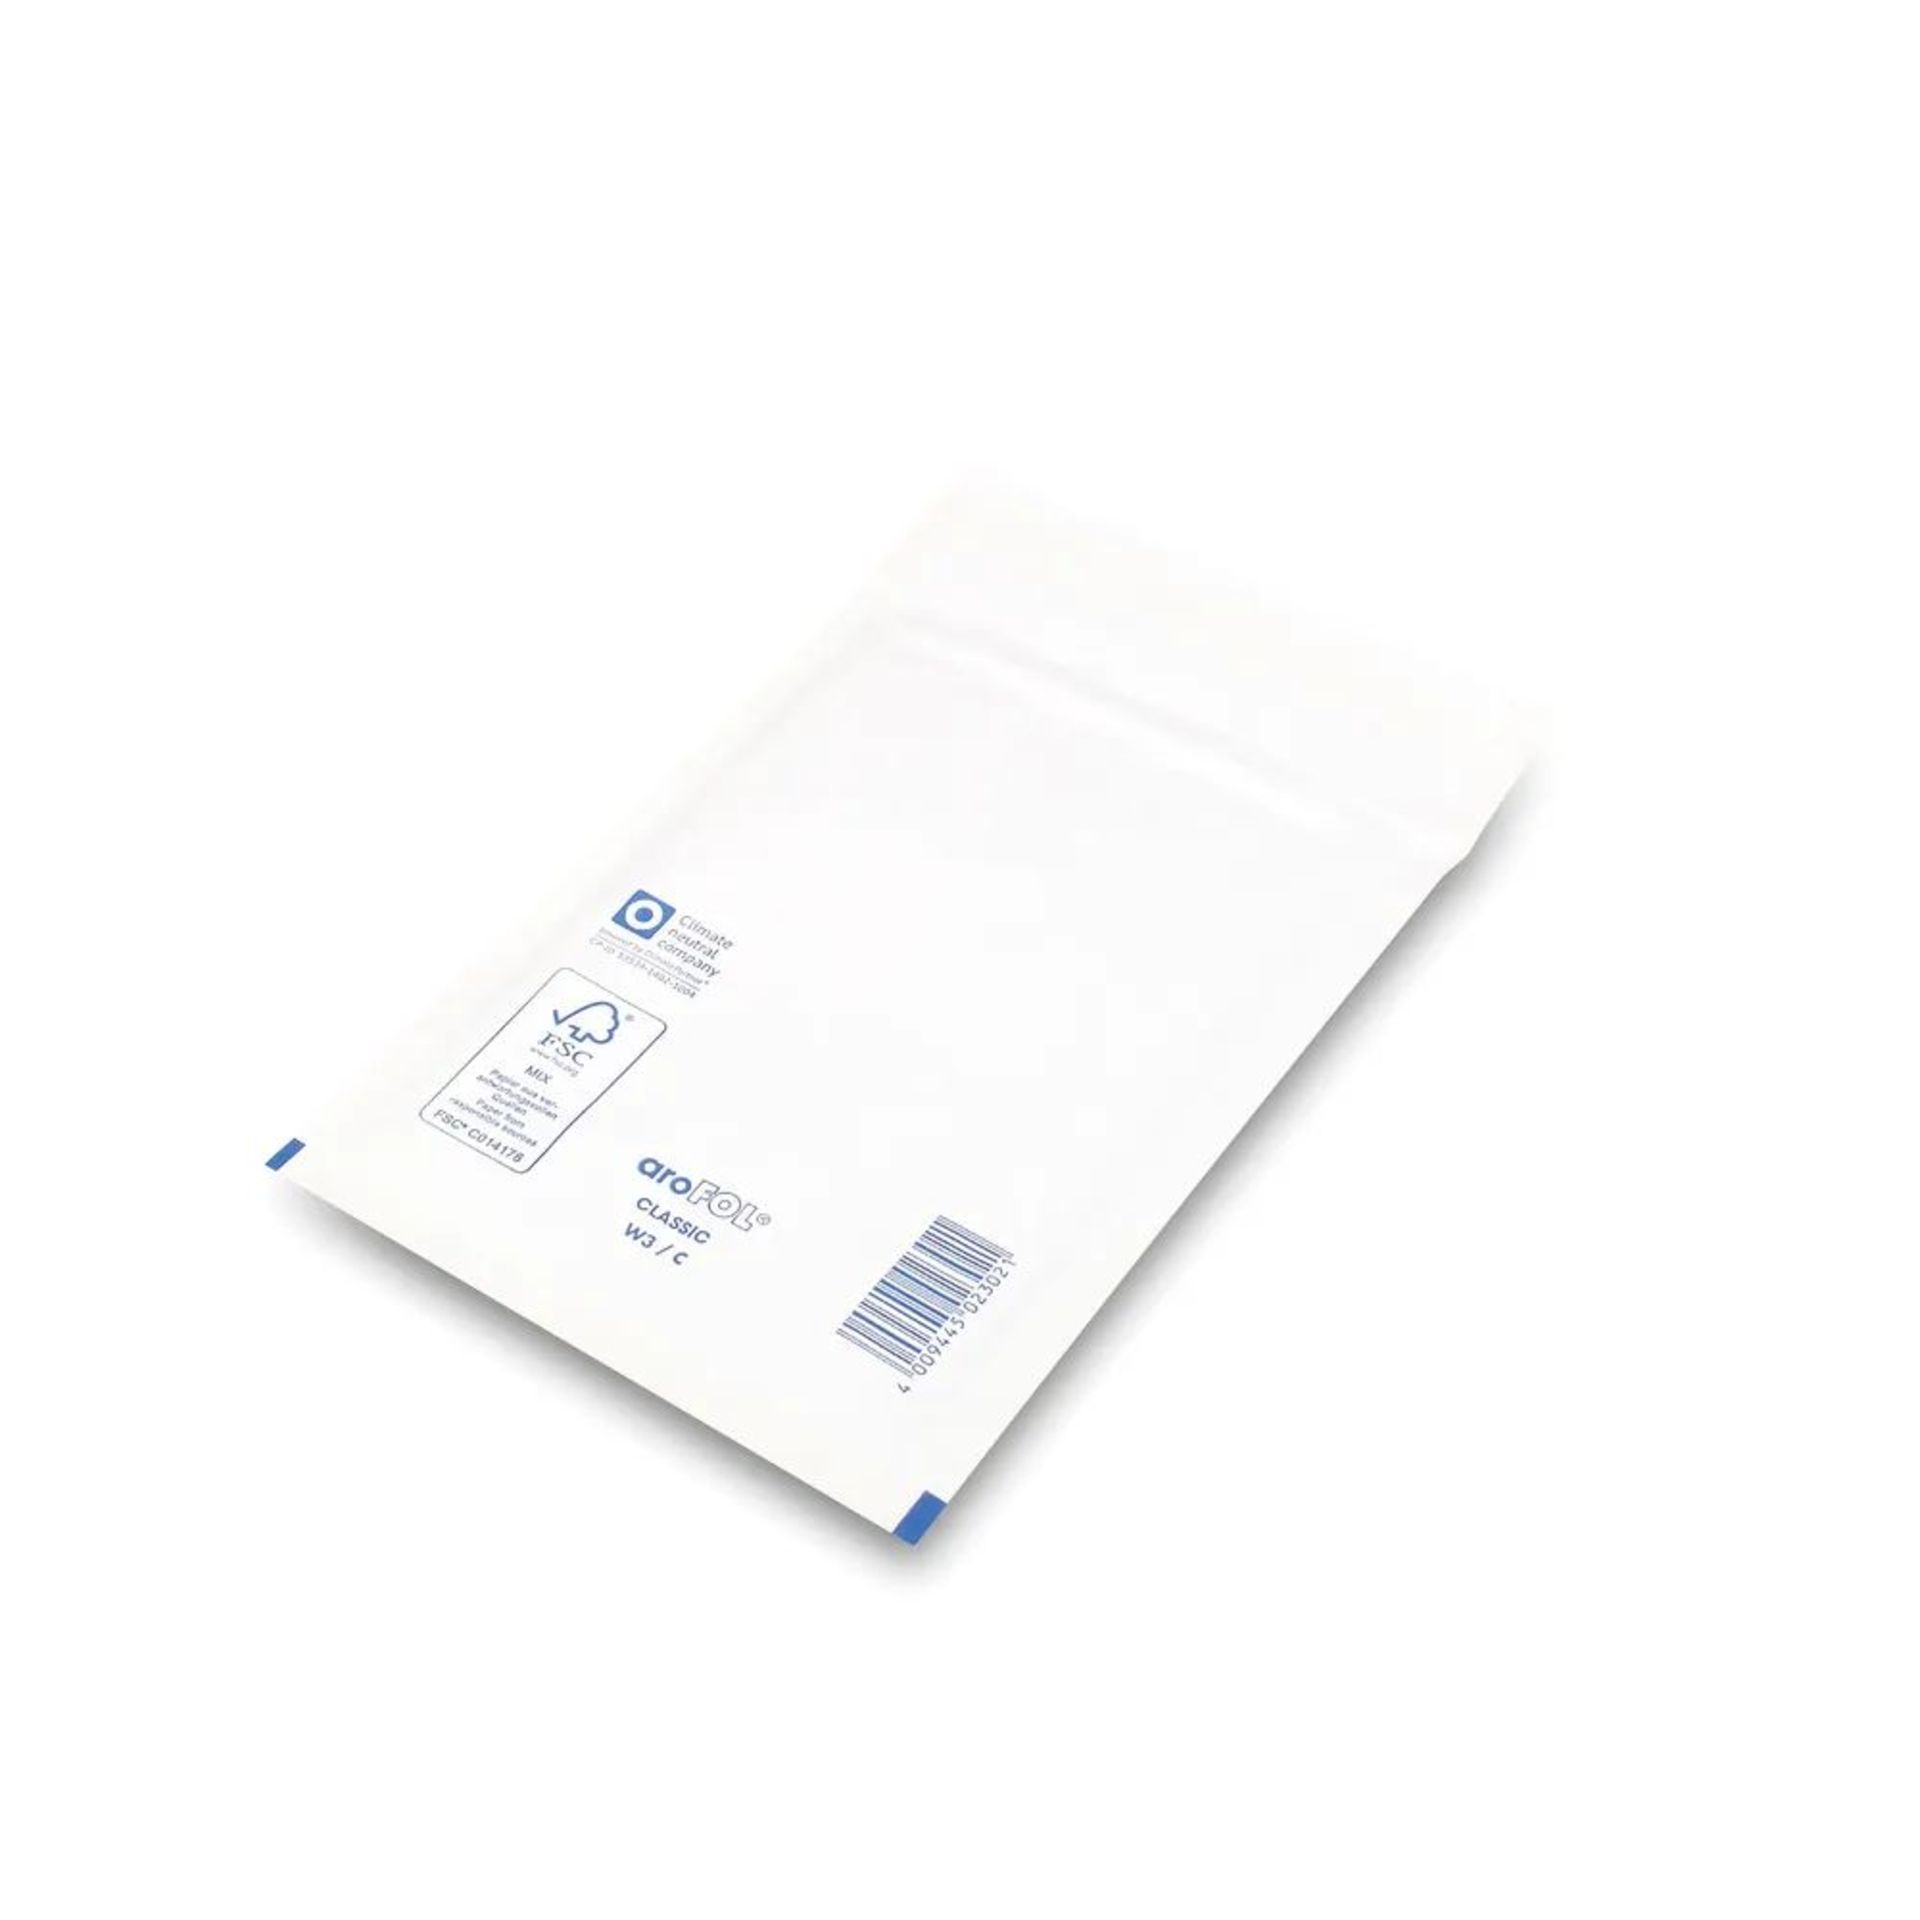 800 X BRAND NEW BUBBLE LINED ENVELOPES IN VARIOUS SIZES R10-7